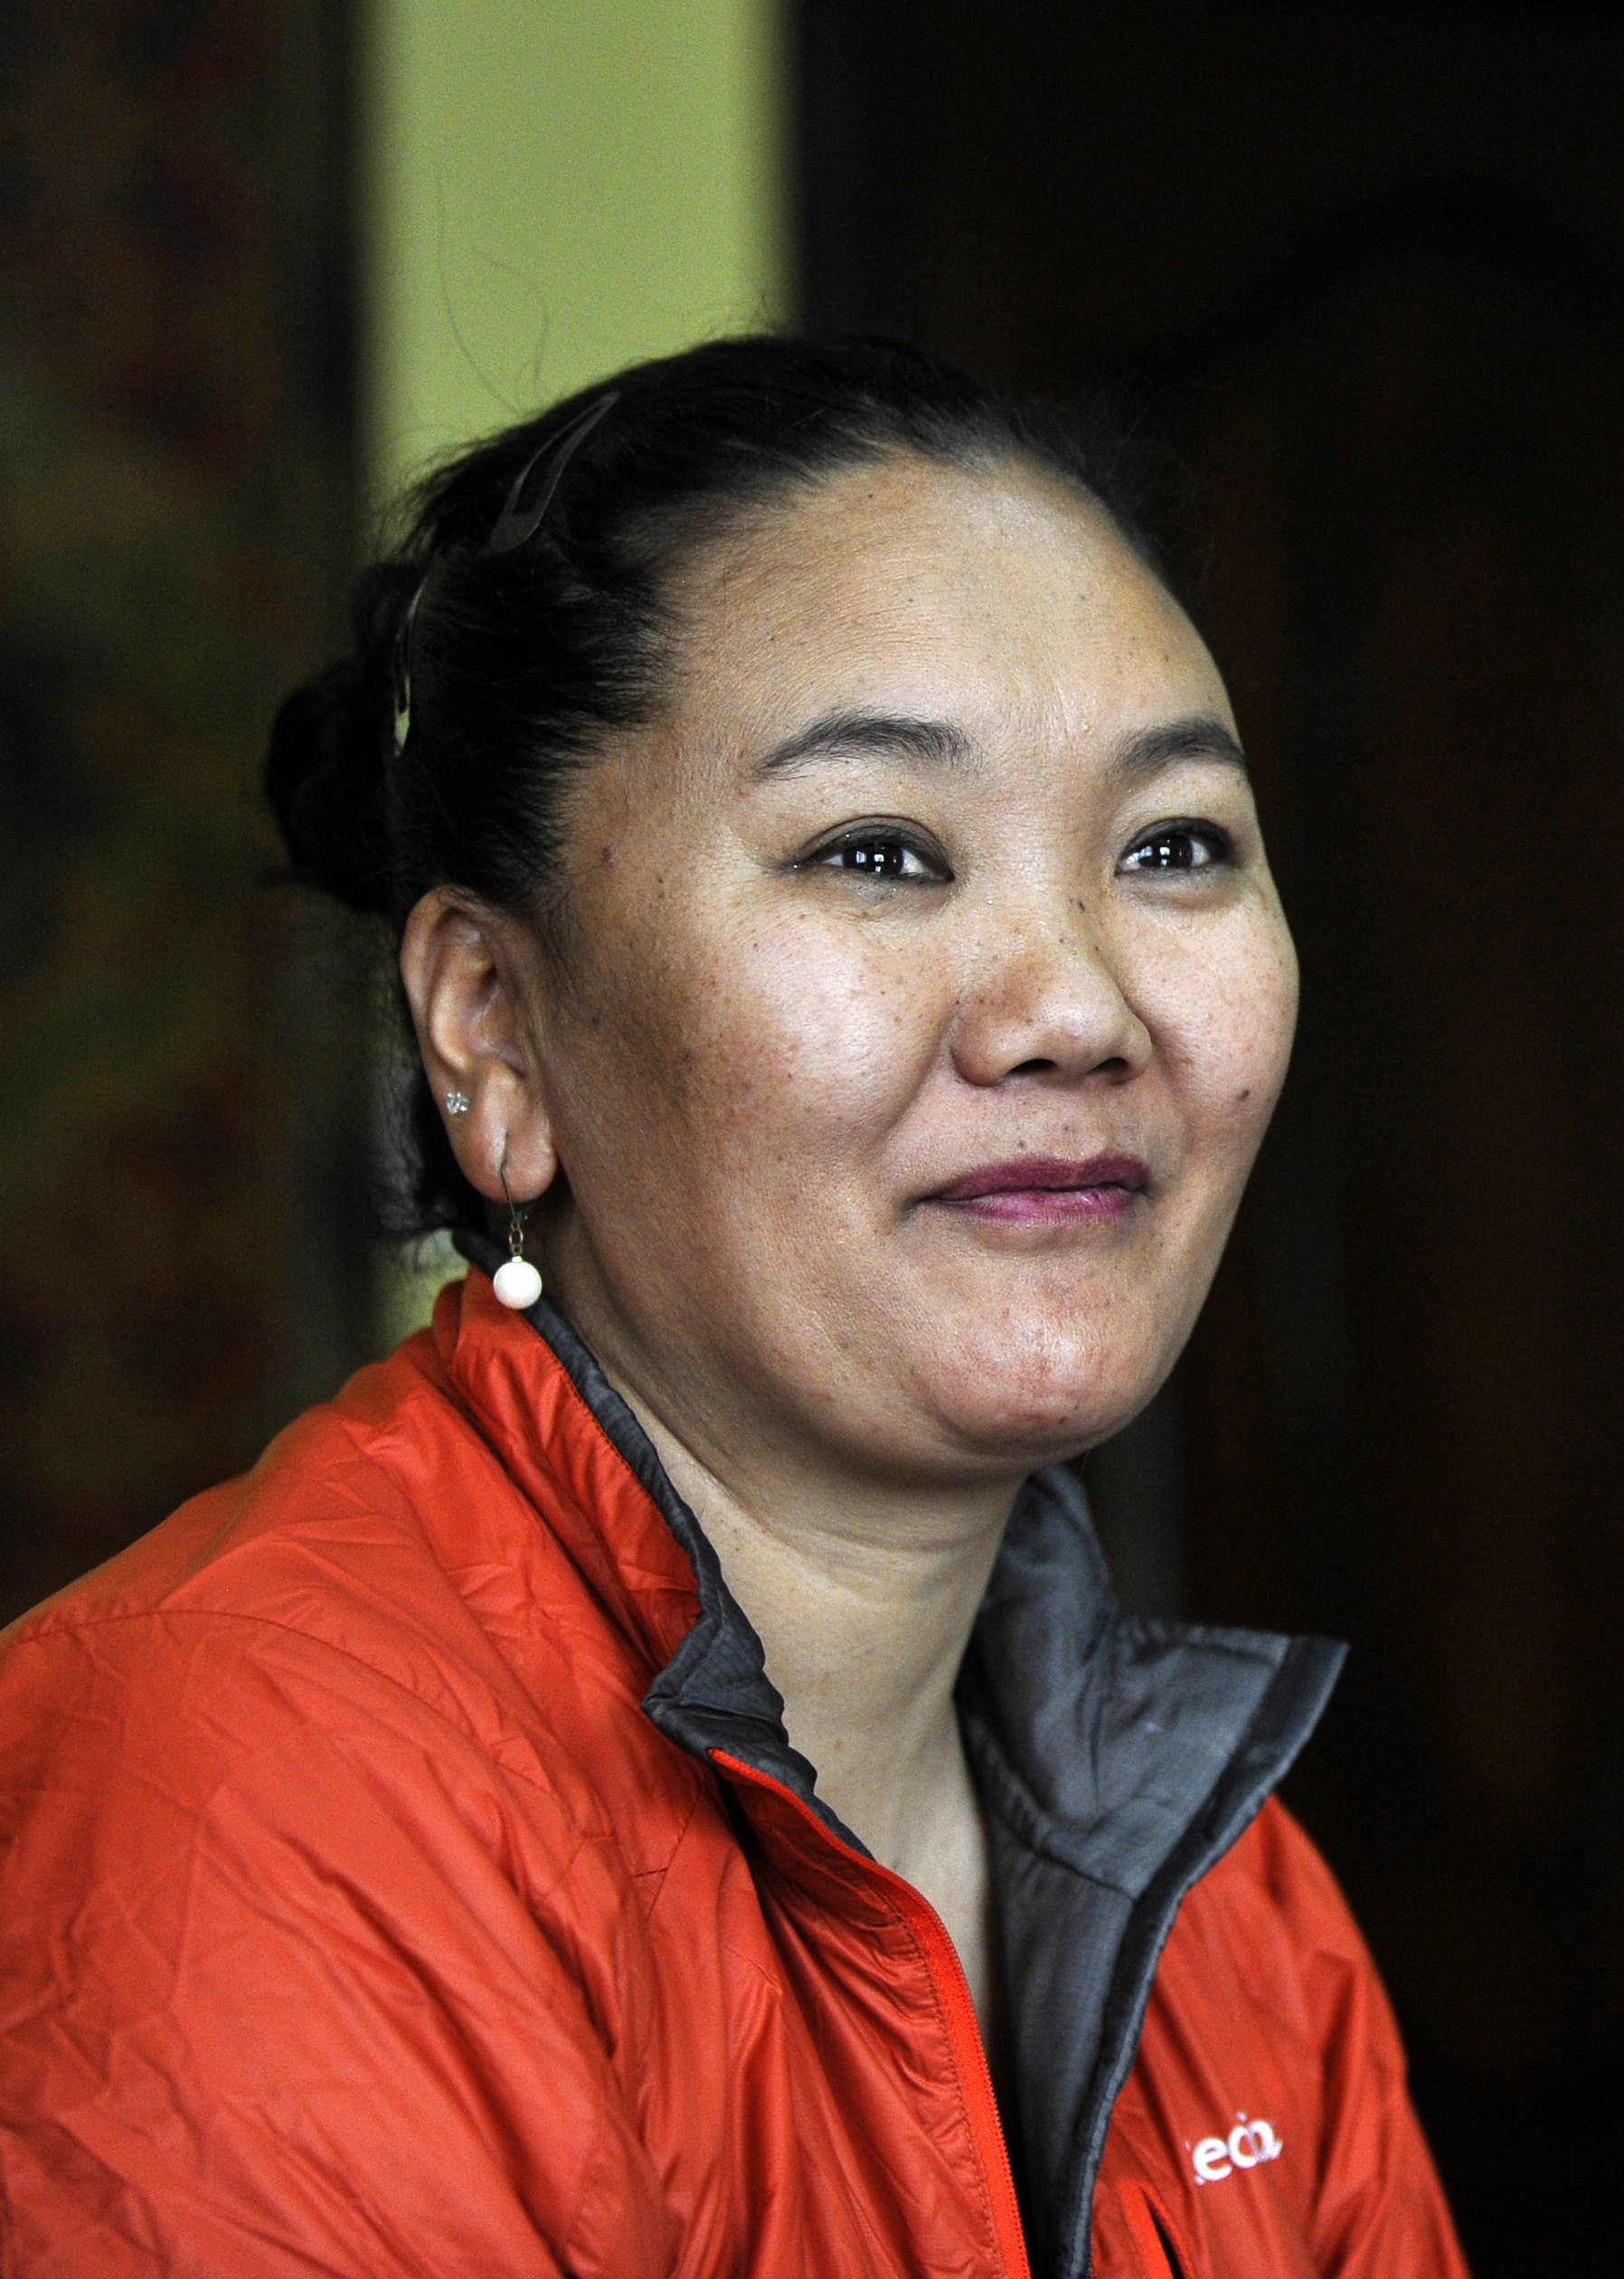 In this photograph taken on April 13, 2016, Nepalese mountaineer Lakpa Sherpa prepares her equipment during an interview with AFP in Kathmandu. The daughter of a yak herder, Lhakpa Sherpa worked as a porter and kitchen hand on trekking and mountaineering expeditions when she was young, before climbing solo. Generations of men from Nepal's famed Sherpa community have climbed the Himalayas, while their wives and daughters have traditionally kept the home fires burning. But in a sign of changing times, a string of Sherpa women are now breaking records themselves, not only on 8,848-metre (29,029-foot) high Everest but other dangerous peaks. / AFP / PRAKASH MATHEMA / TO GO WITH AFP STORY NEPAL-MOUNTAINEERING-GENDER-QUAKE,FEATURE BY AMMU KANNAMPILLY (Photo credit should read PRAKASH MATHEMA/AFP/Getty Images)